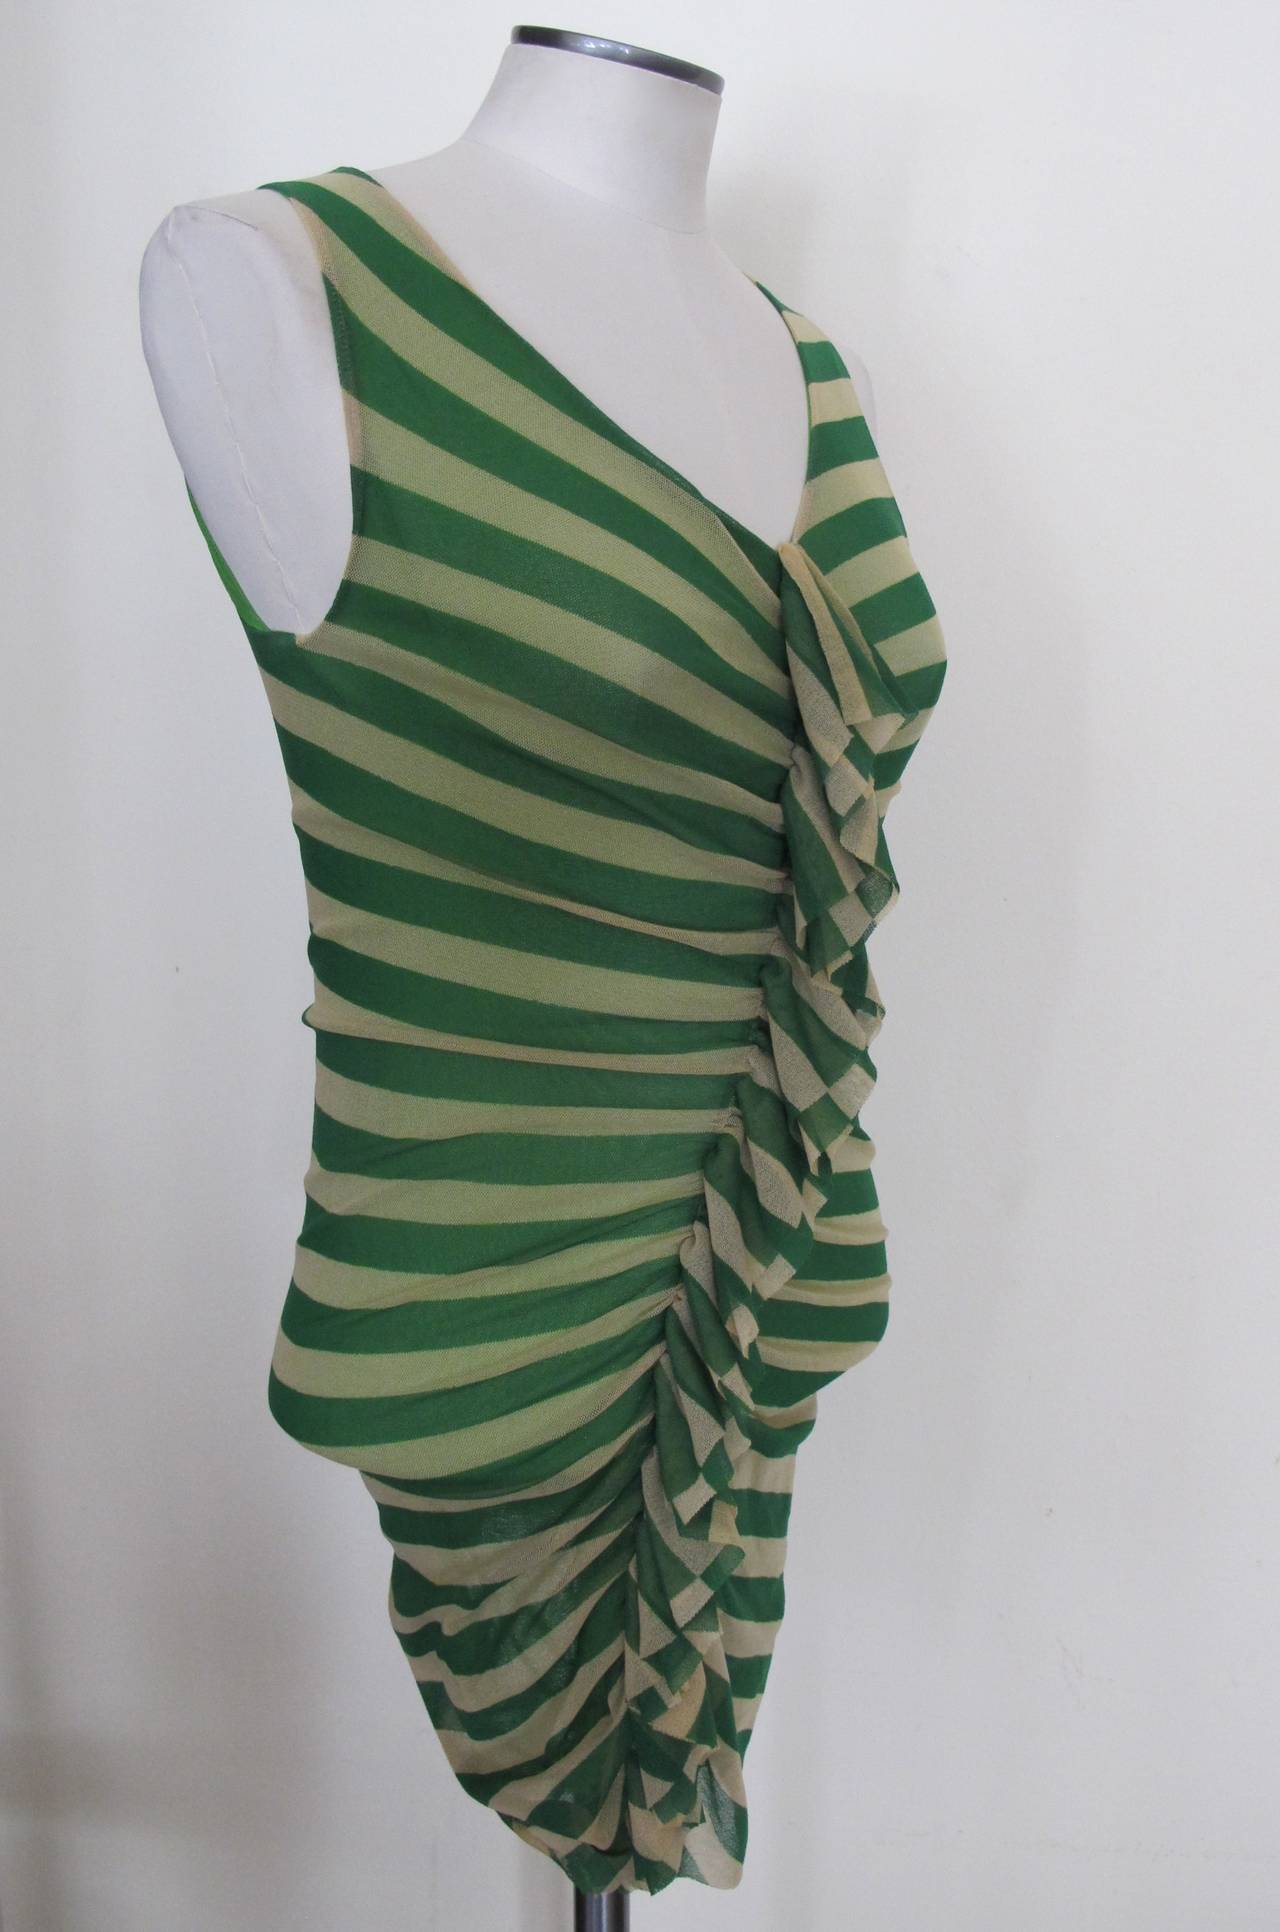 This chic, iconic Jean Paul Gaultier may be worn during the day or in the evening. The emerald green color is rich and the beige and emerald stripes and cascading ruffle lend the pice to make a statement. As in many of the Gaultier pieces the fabric